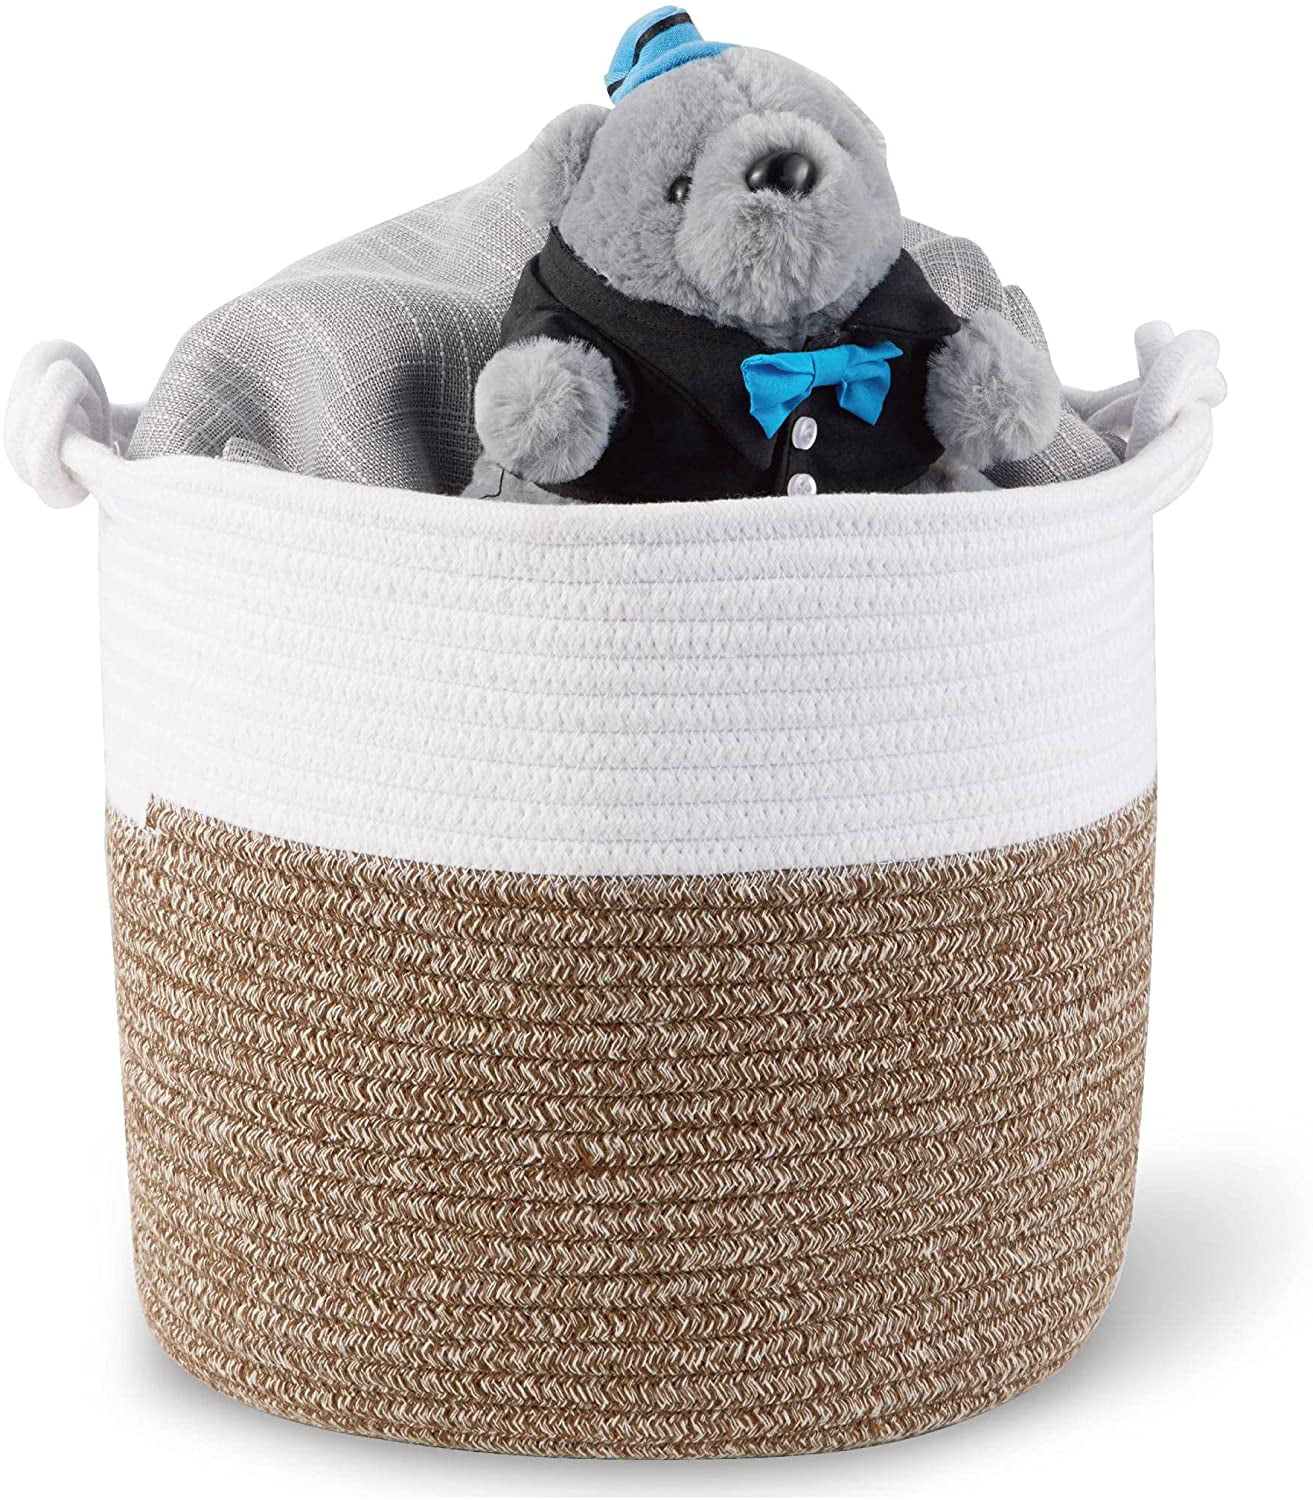 Laundry Basket Nursery Basket for Kids Clothes 12” x 12” x 7” Toys Toy Storage Basket Woven Cotton Rope Basket Towels Decorative Storage Basket with Handle 